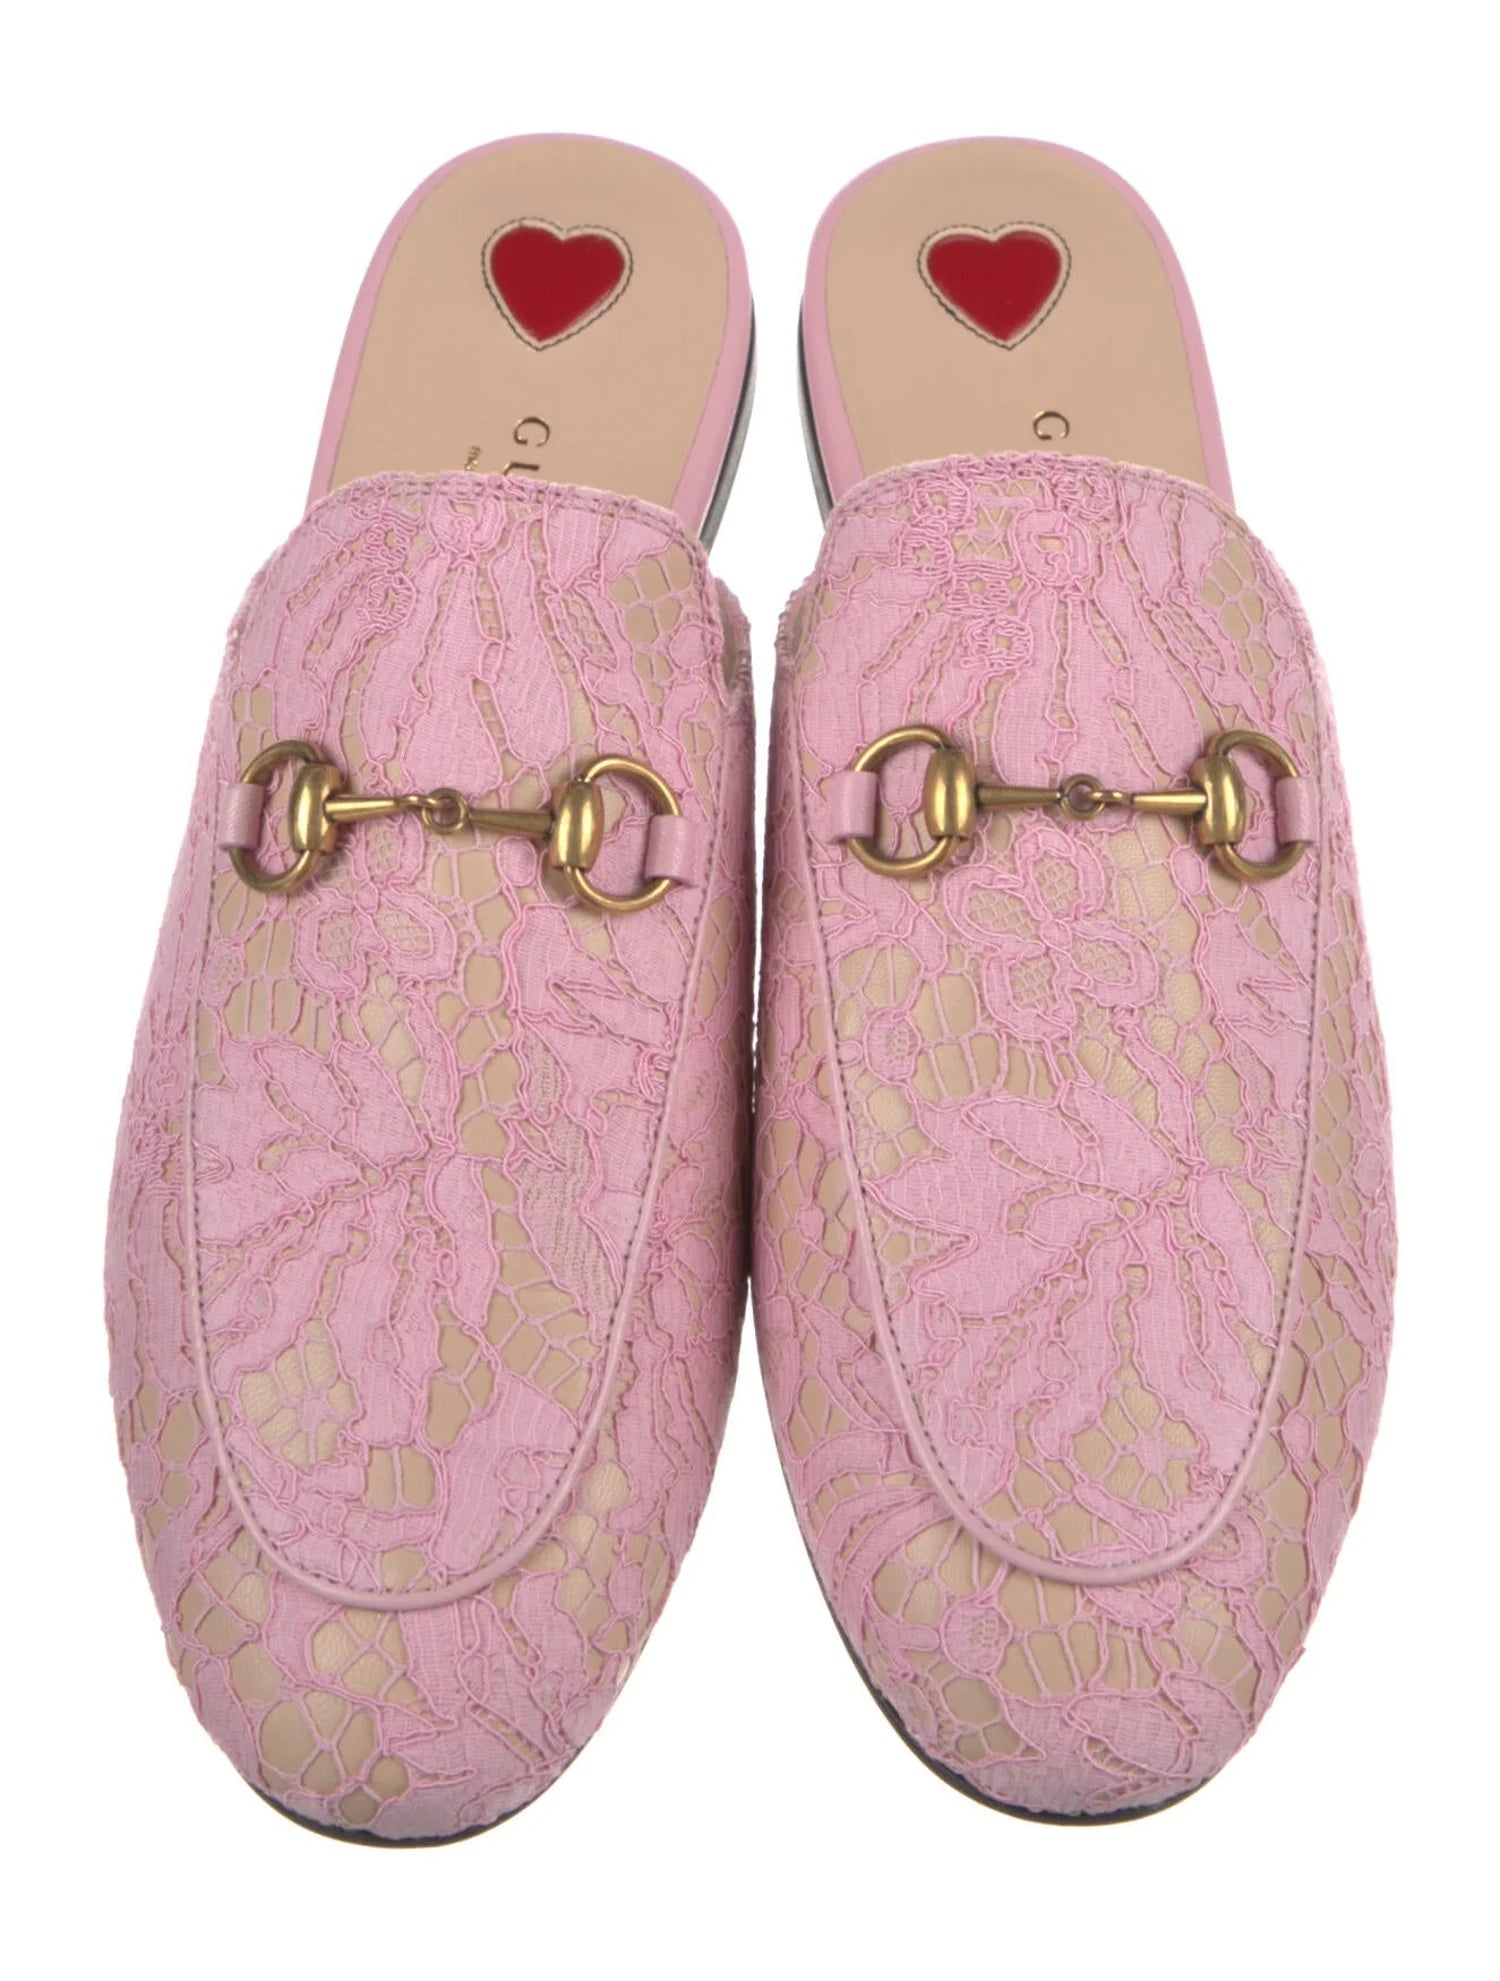 Gucci Pink Fur-lined Princetown Slippers